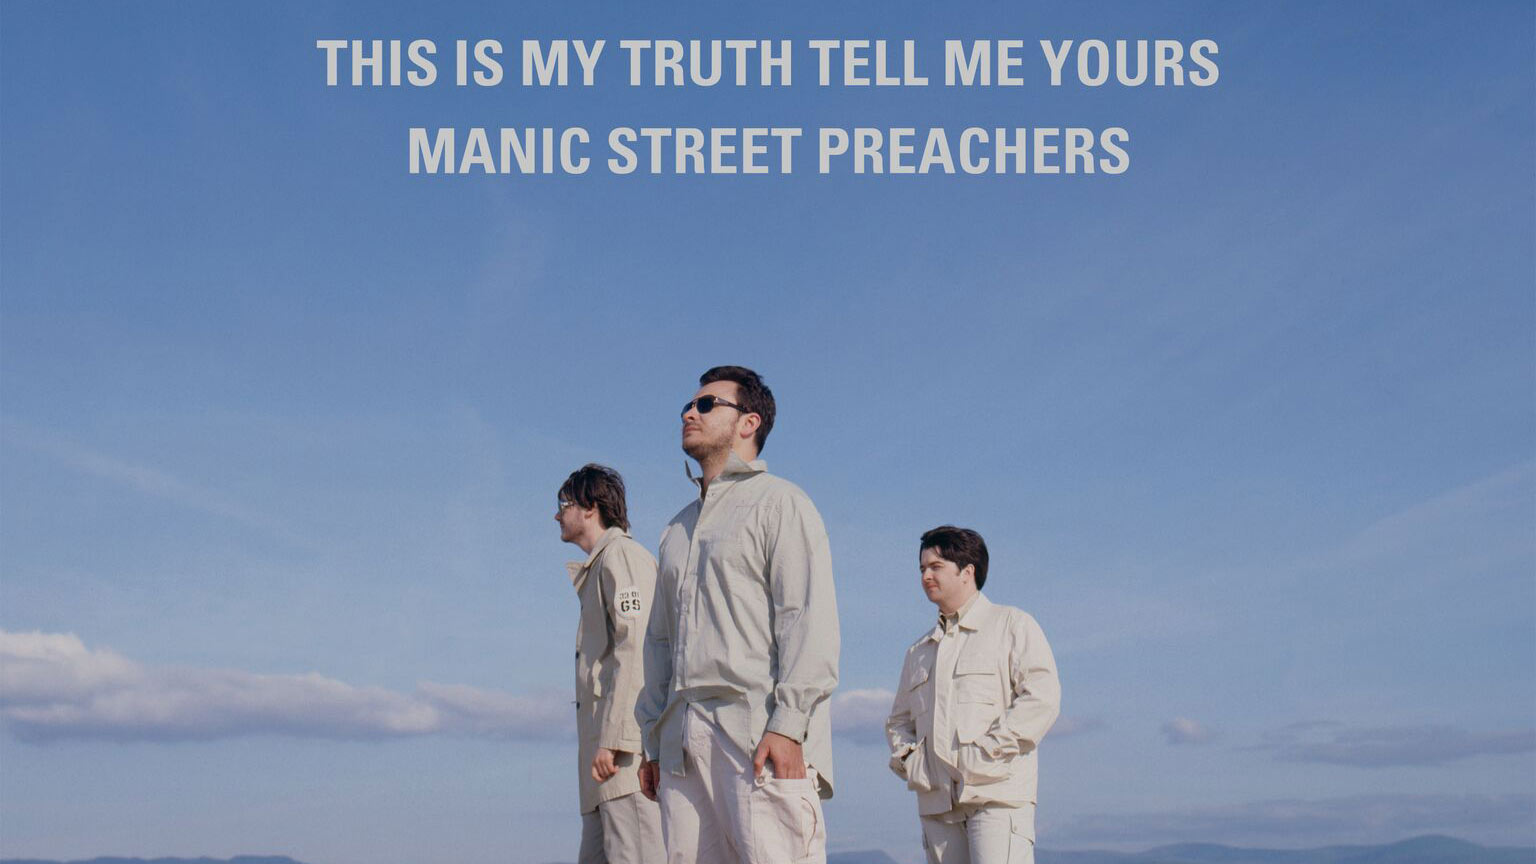 Manic Street Preachers - This Is My Truth Tell Me Yours (20th Anniversary Edition, Sony Music)